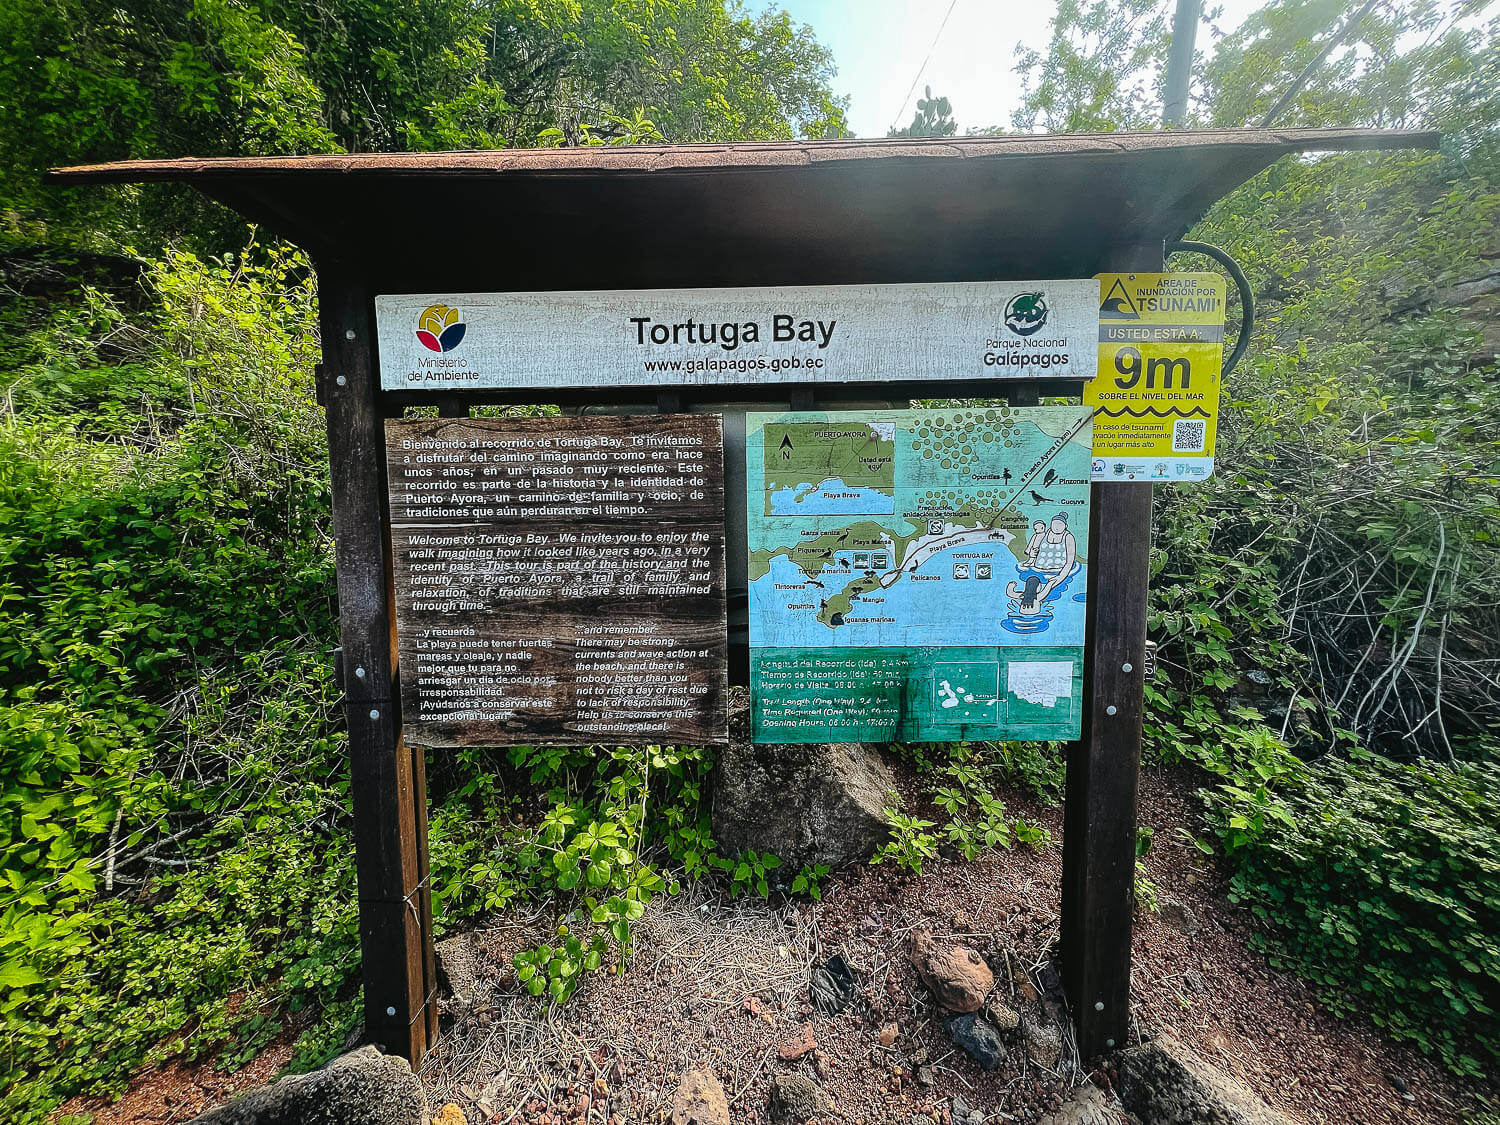 The beginning of the hike to Tortuga Bay